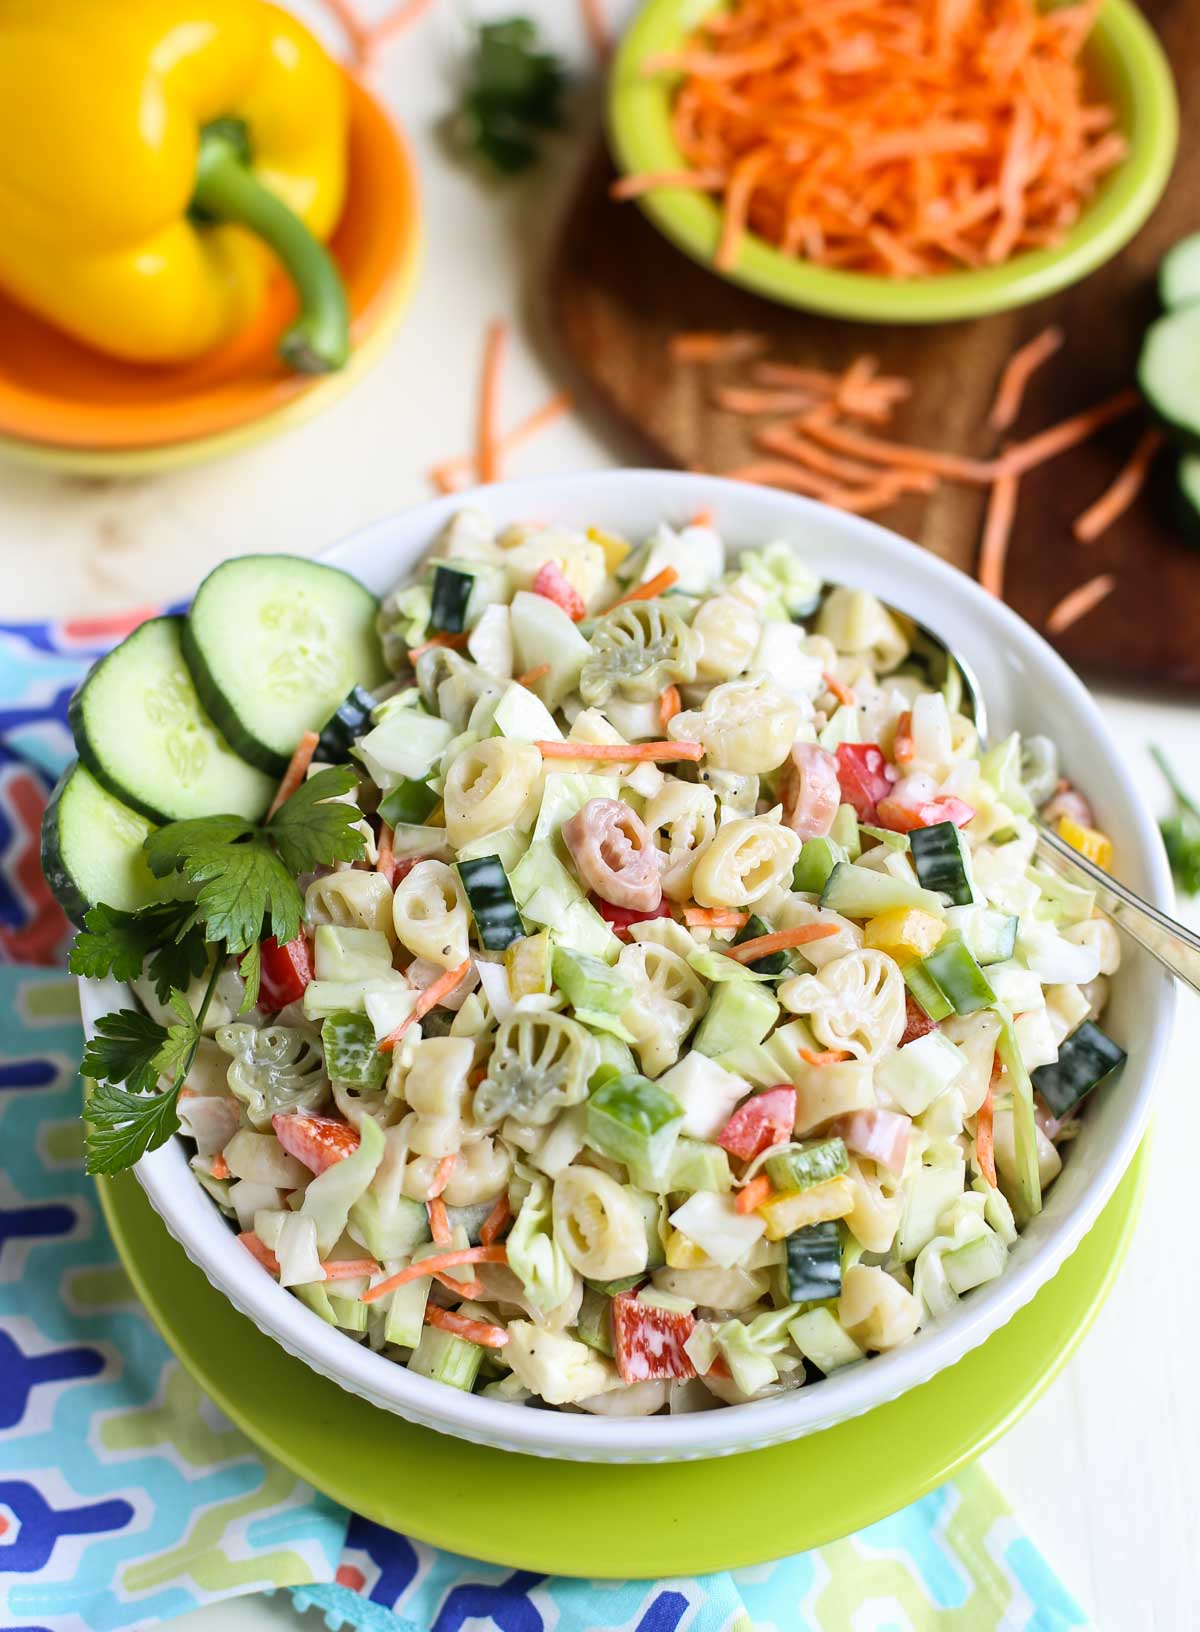 Pasta Slaw | BBQ's favorite side just got better! Pasta, cabbage, peppers, celery, etc plus a sweet and tangy sauce - it's a Wow! } WorldofPastabilities.com